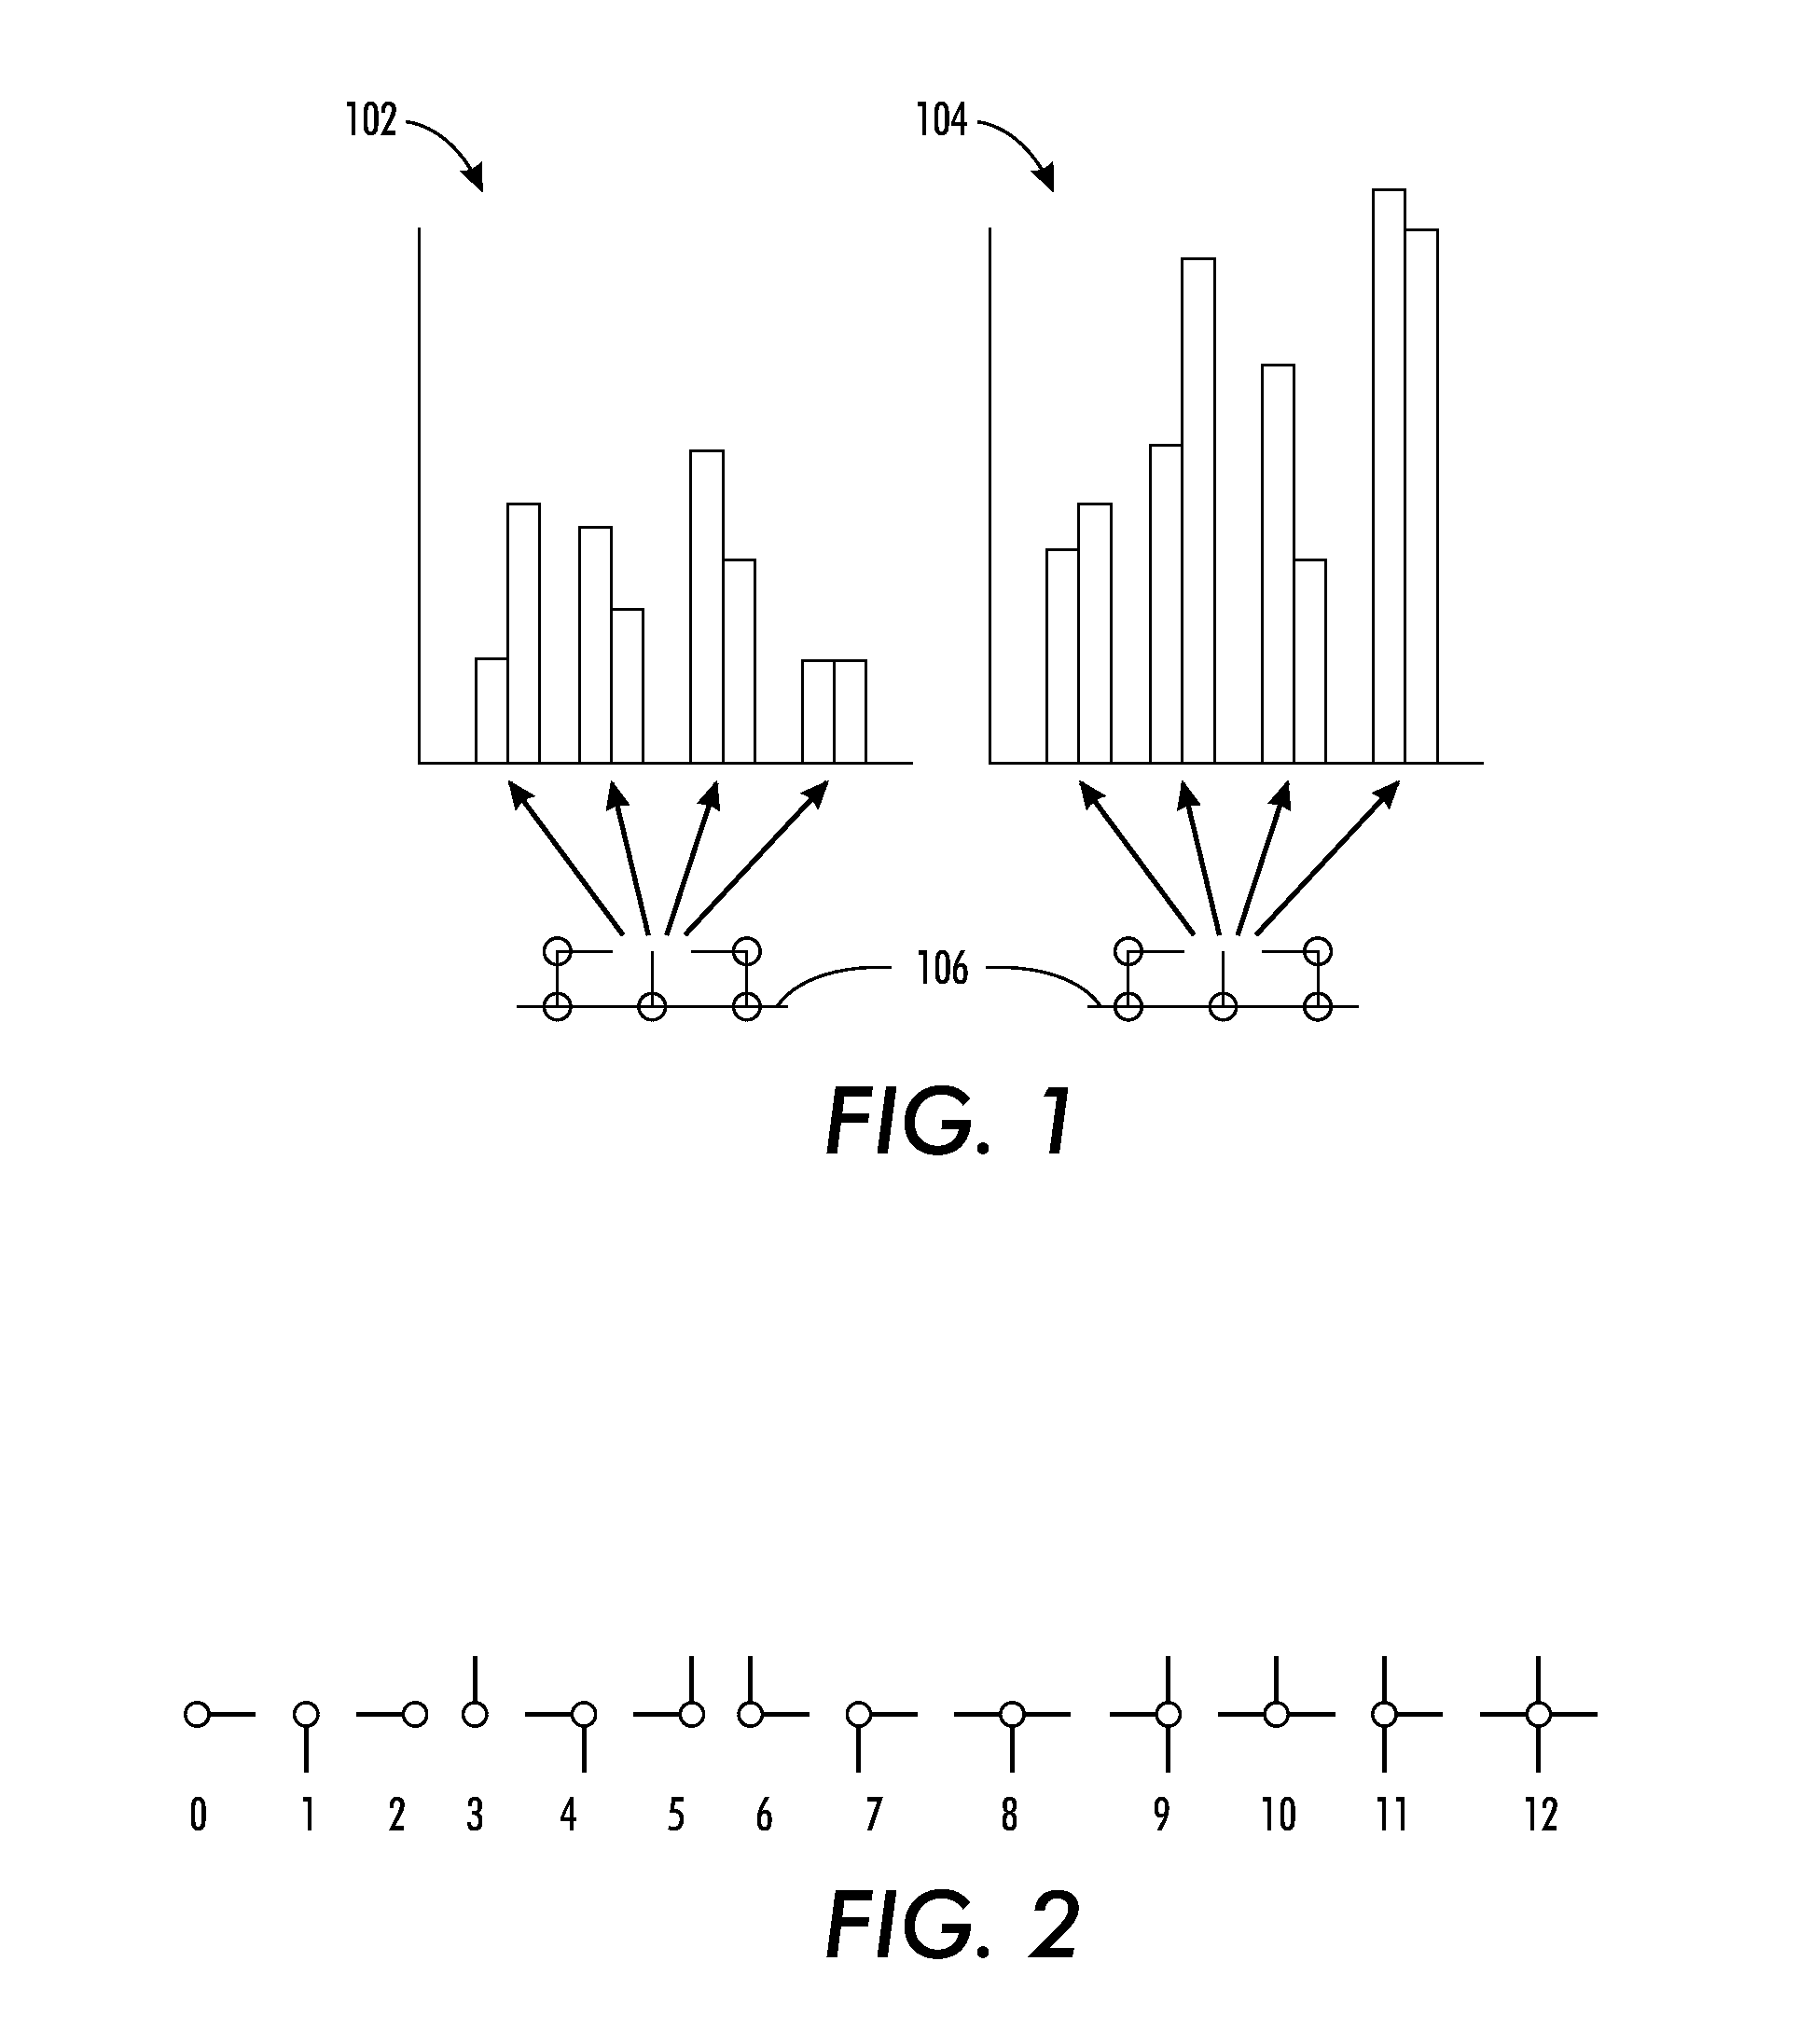 Graph lattice method for image clustering, classification, and repeated structure finding